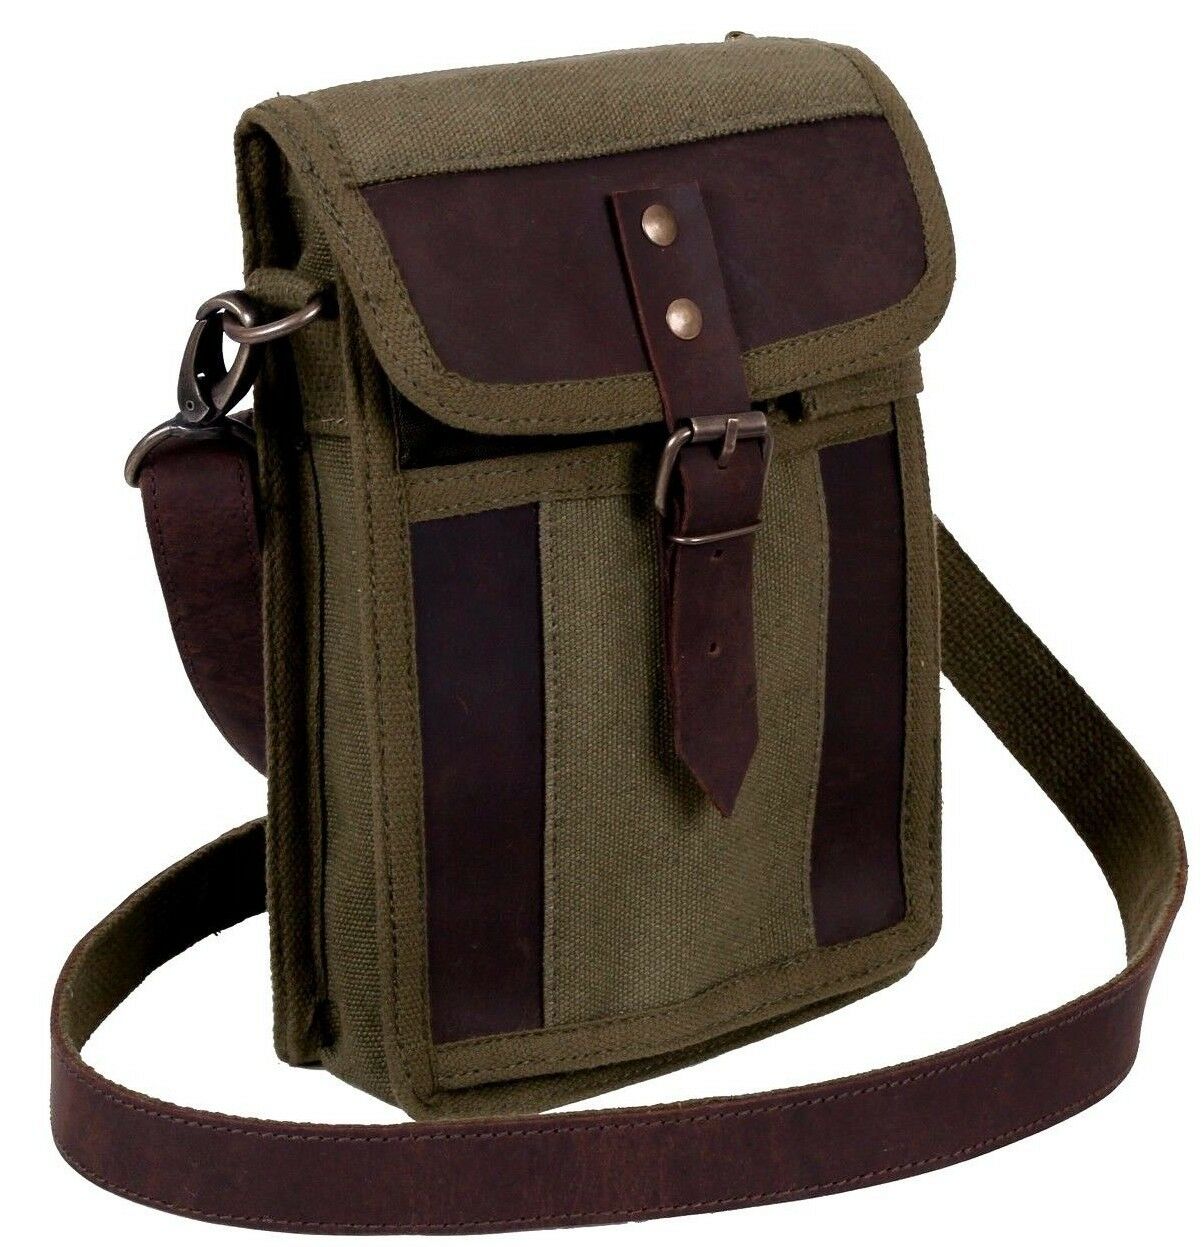 Rothco Canvas Travel Portfolio Bag With Leather Accents